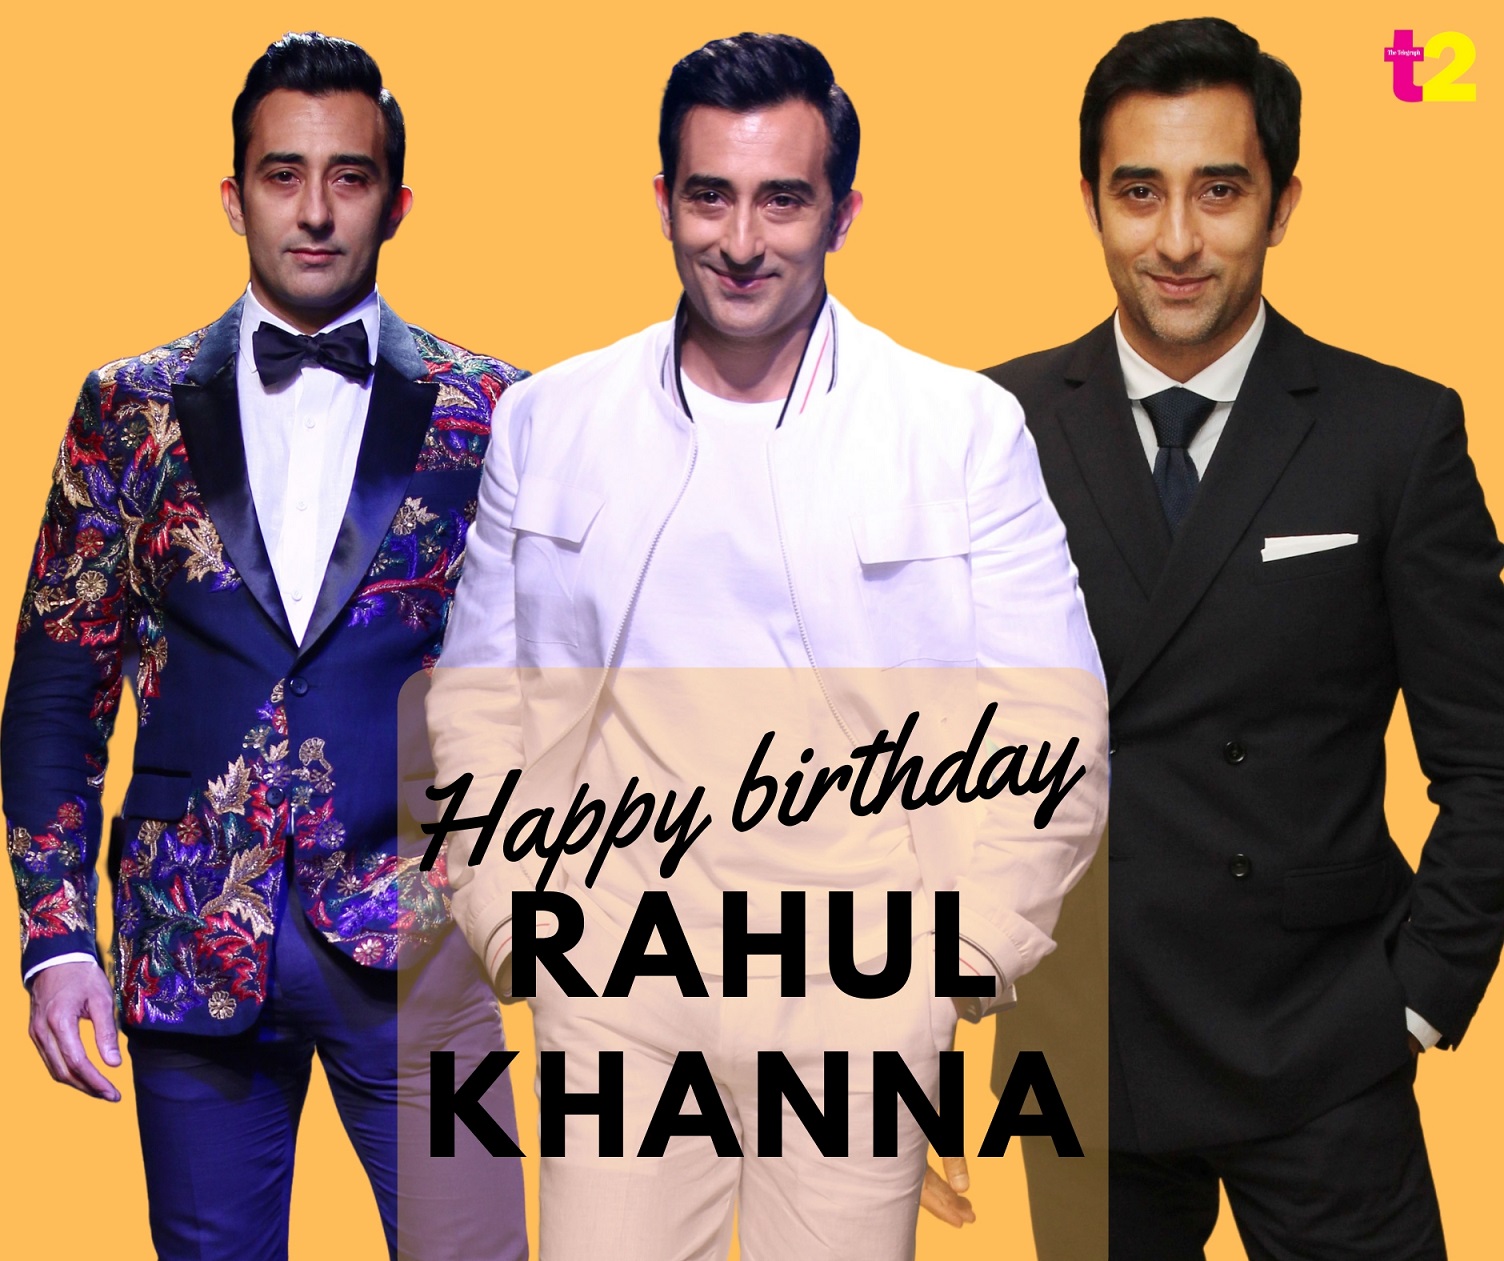 T2 wishes our Rahul Khanna a very happy birthday! 